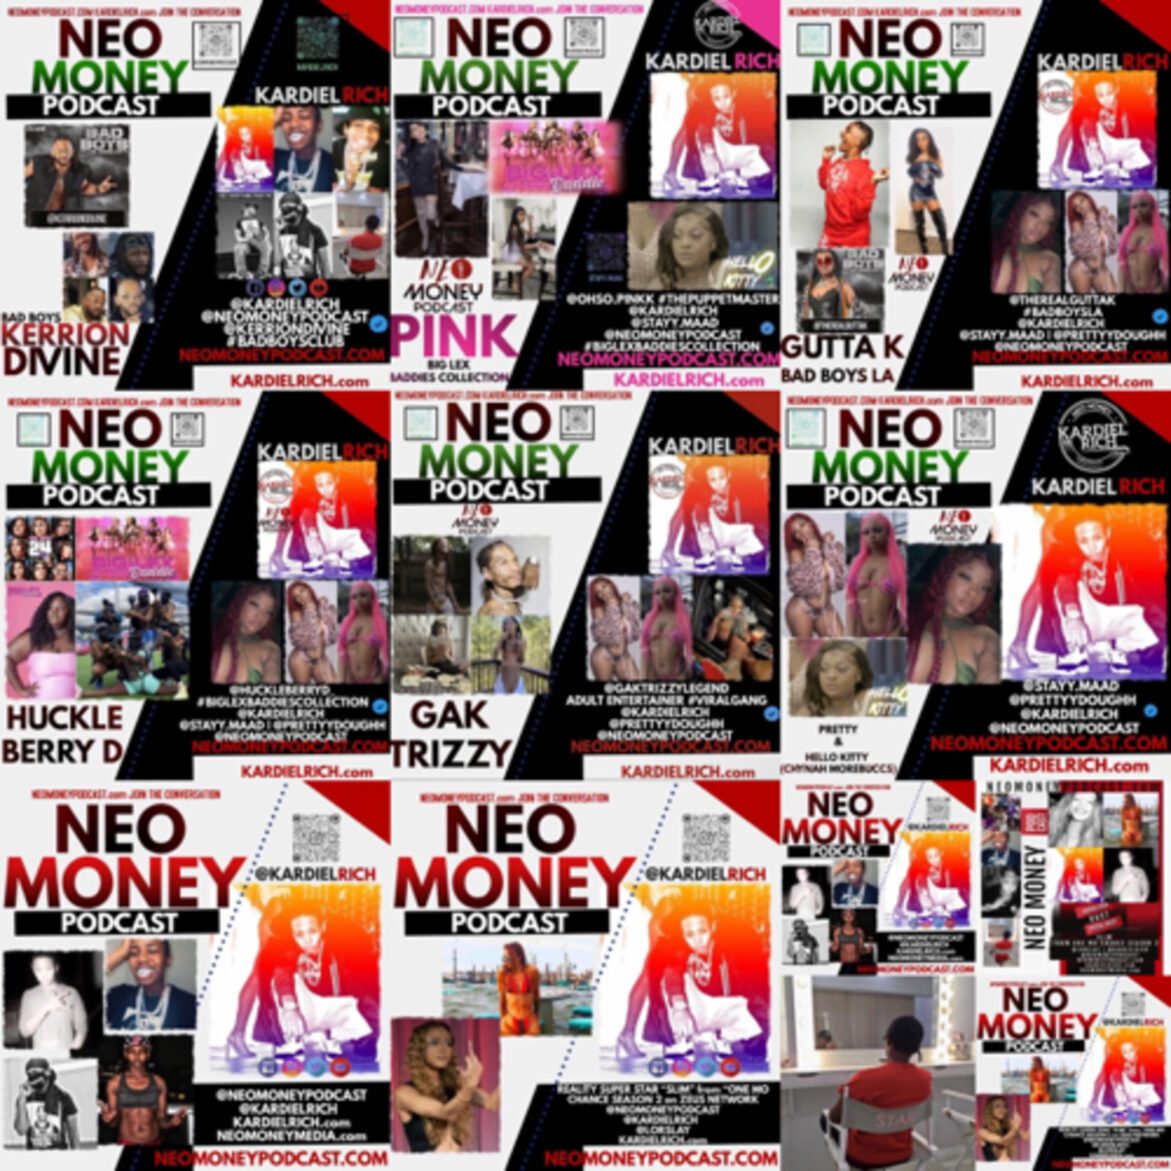 Black Podcasting - NEO MONEY PODCAST ALL STAR EPISODE WITH OUR FAVORITE REALITY STARS FROM ZEUS NETWORK & NOW THATS TV